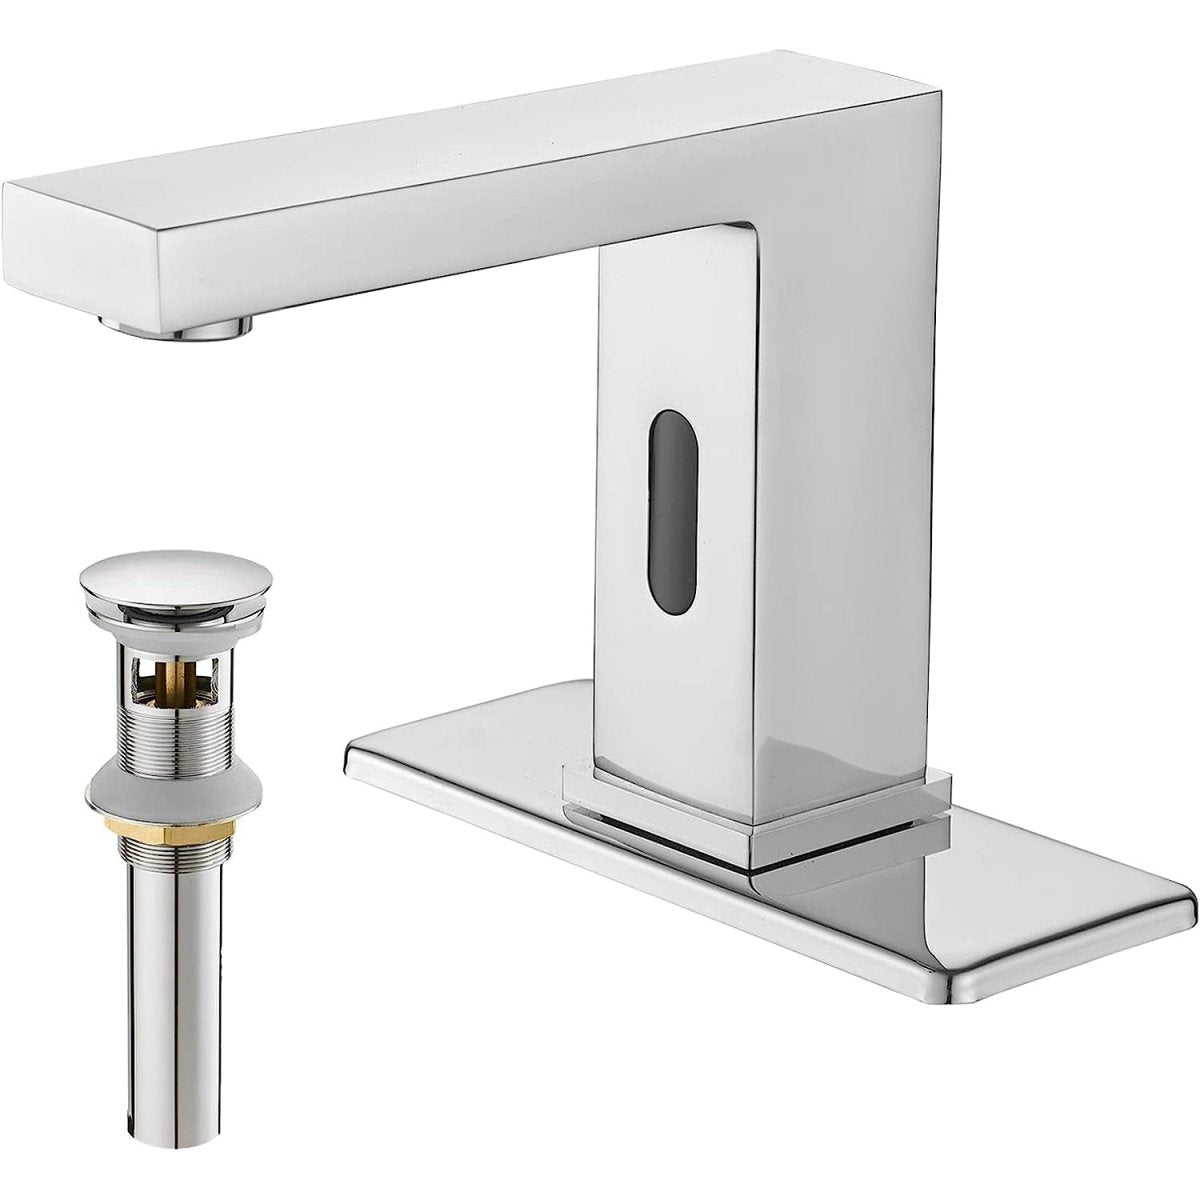 DC Powered Commercial Touchless Bathroom Faucets Chrome - buyfaucet.com